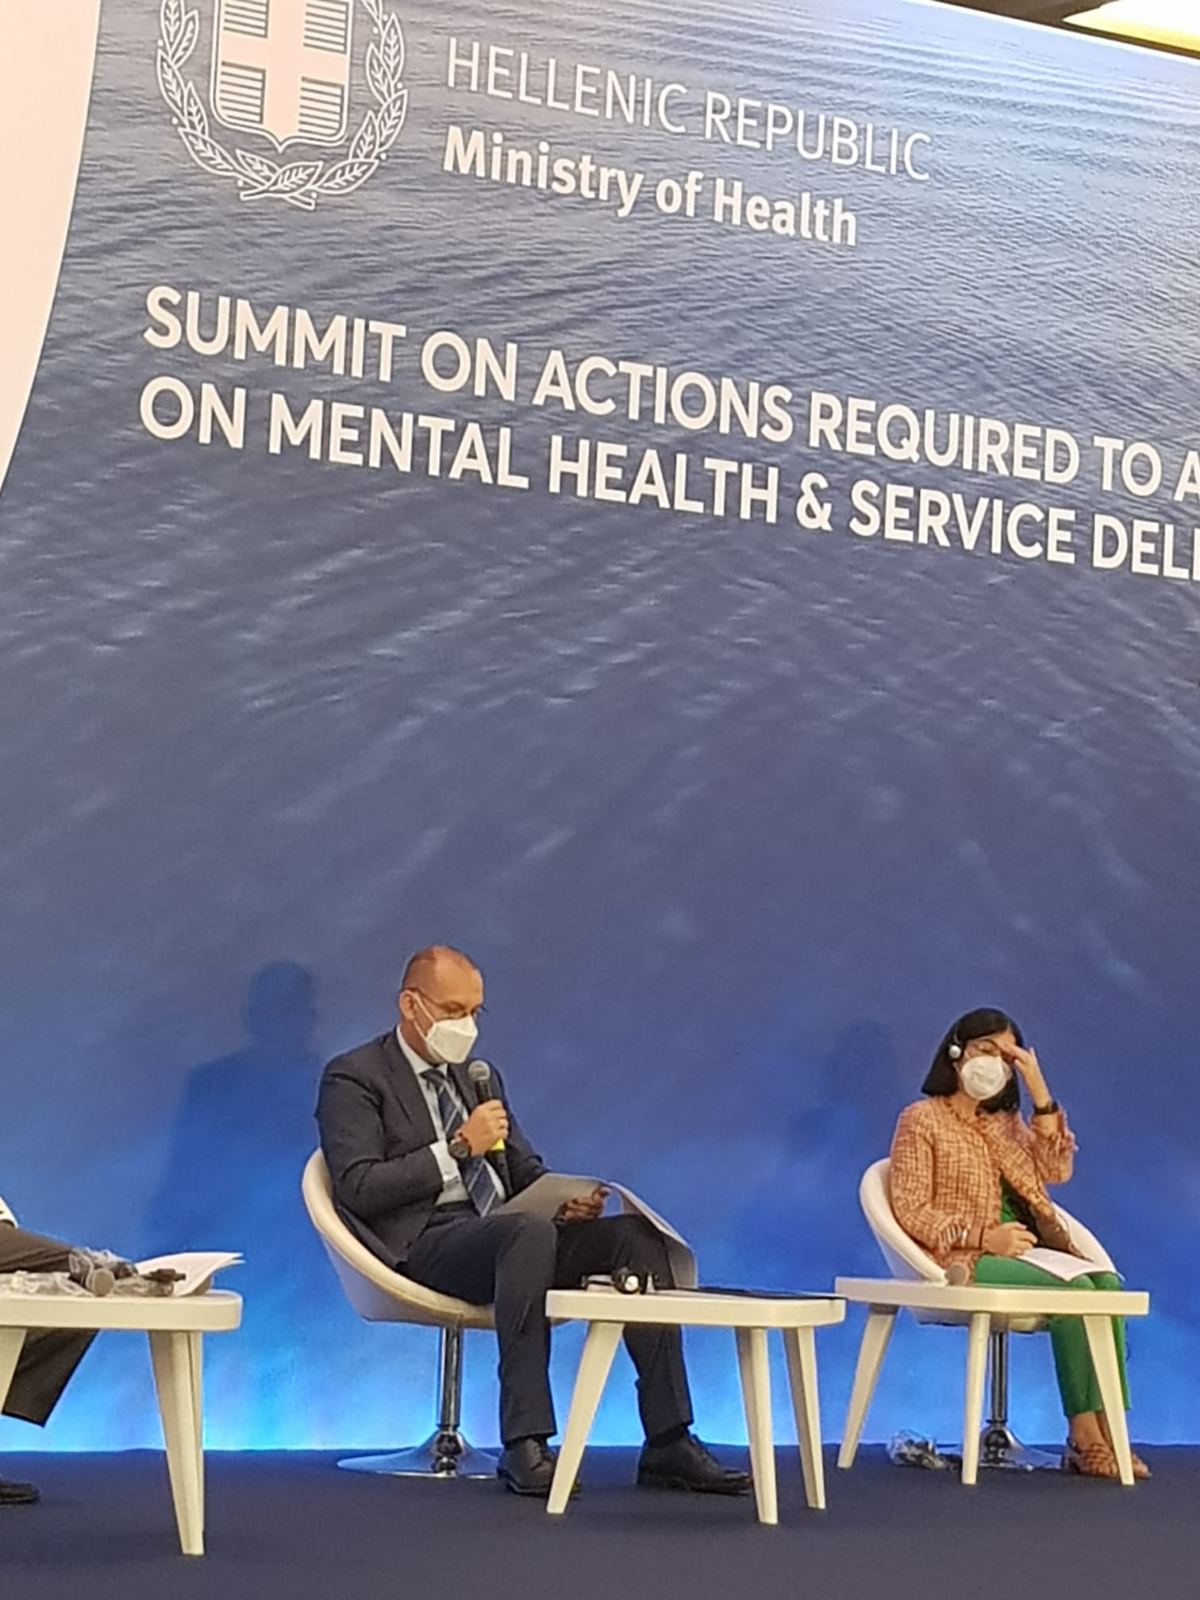 Minister Lončar with the WHO Regional Director at the Summit on Mental Health